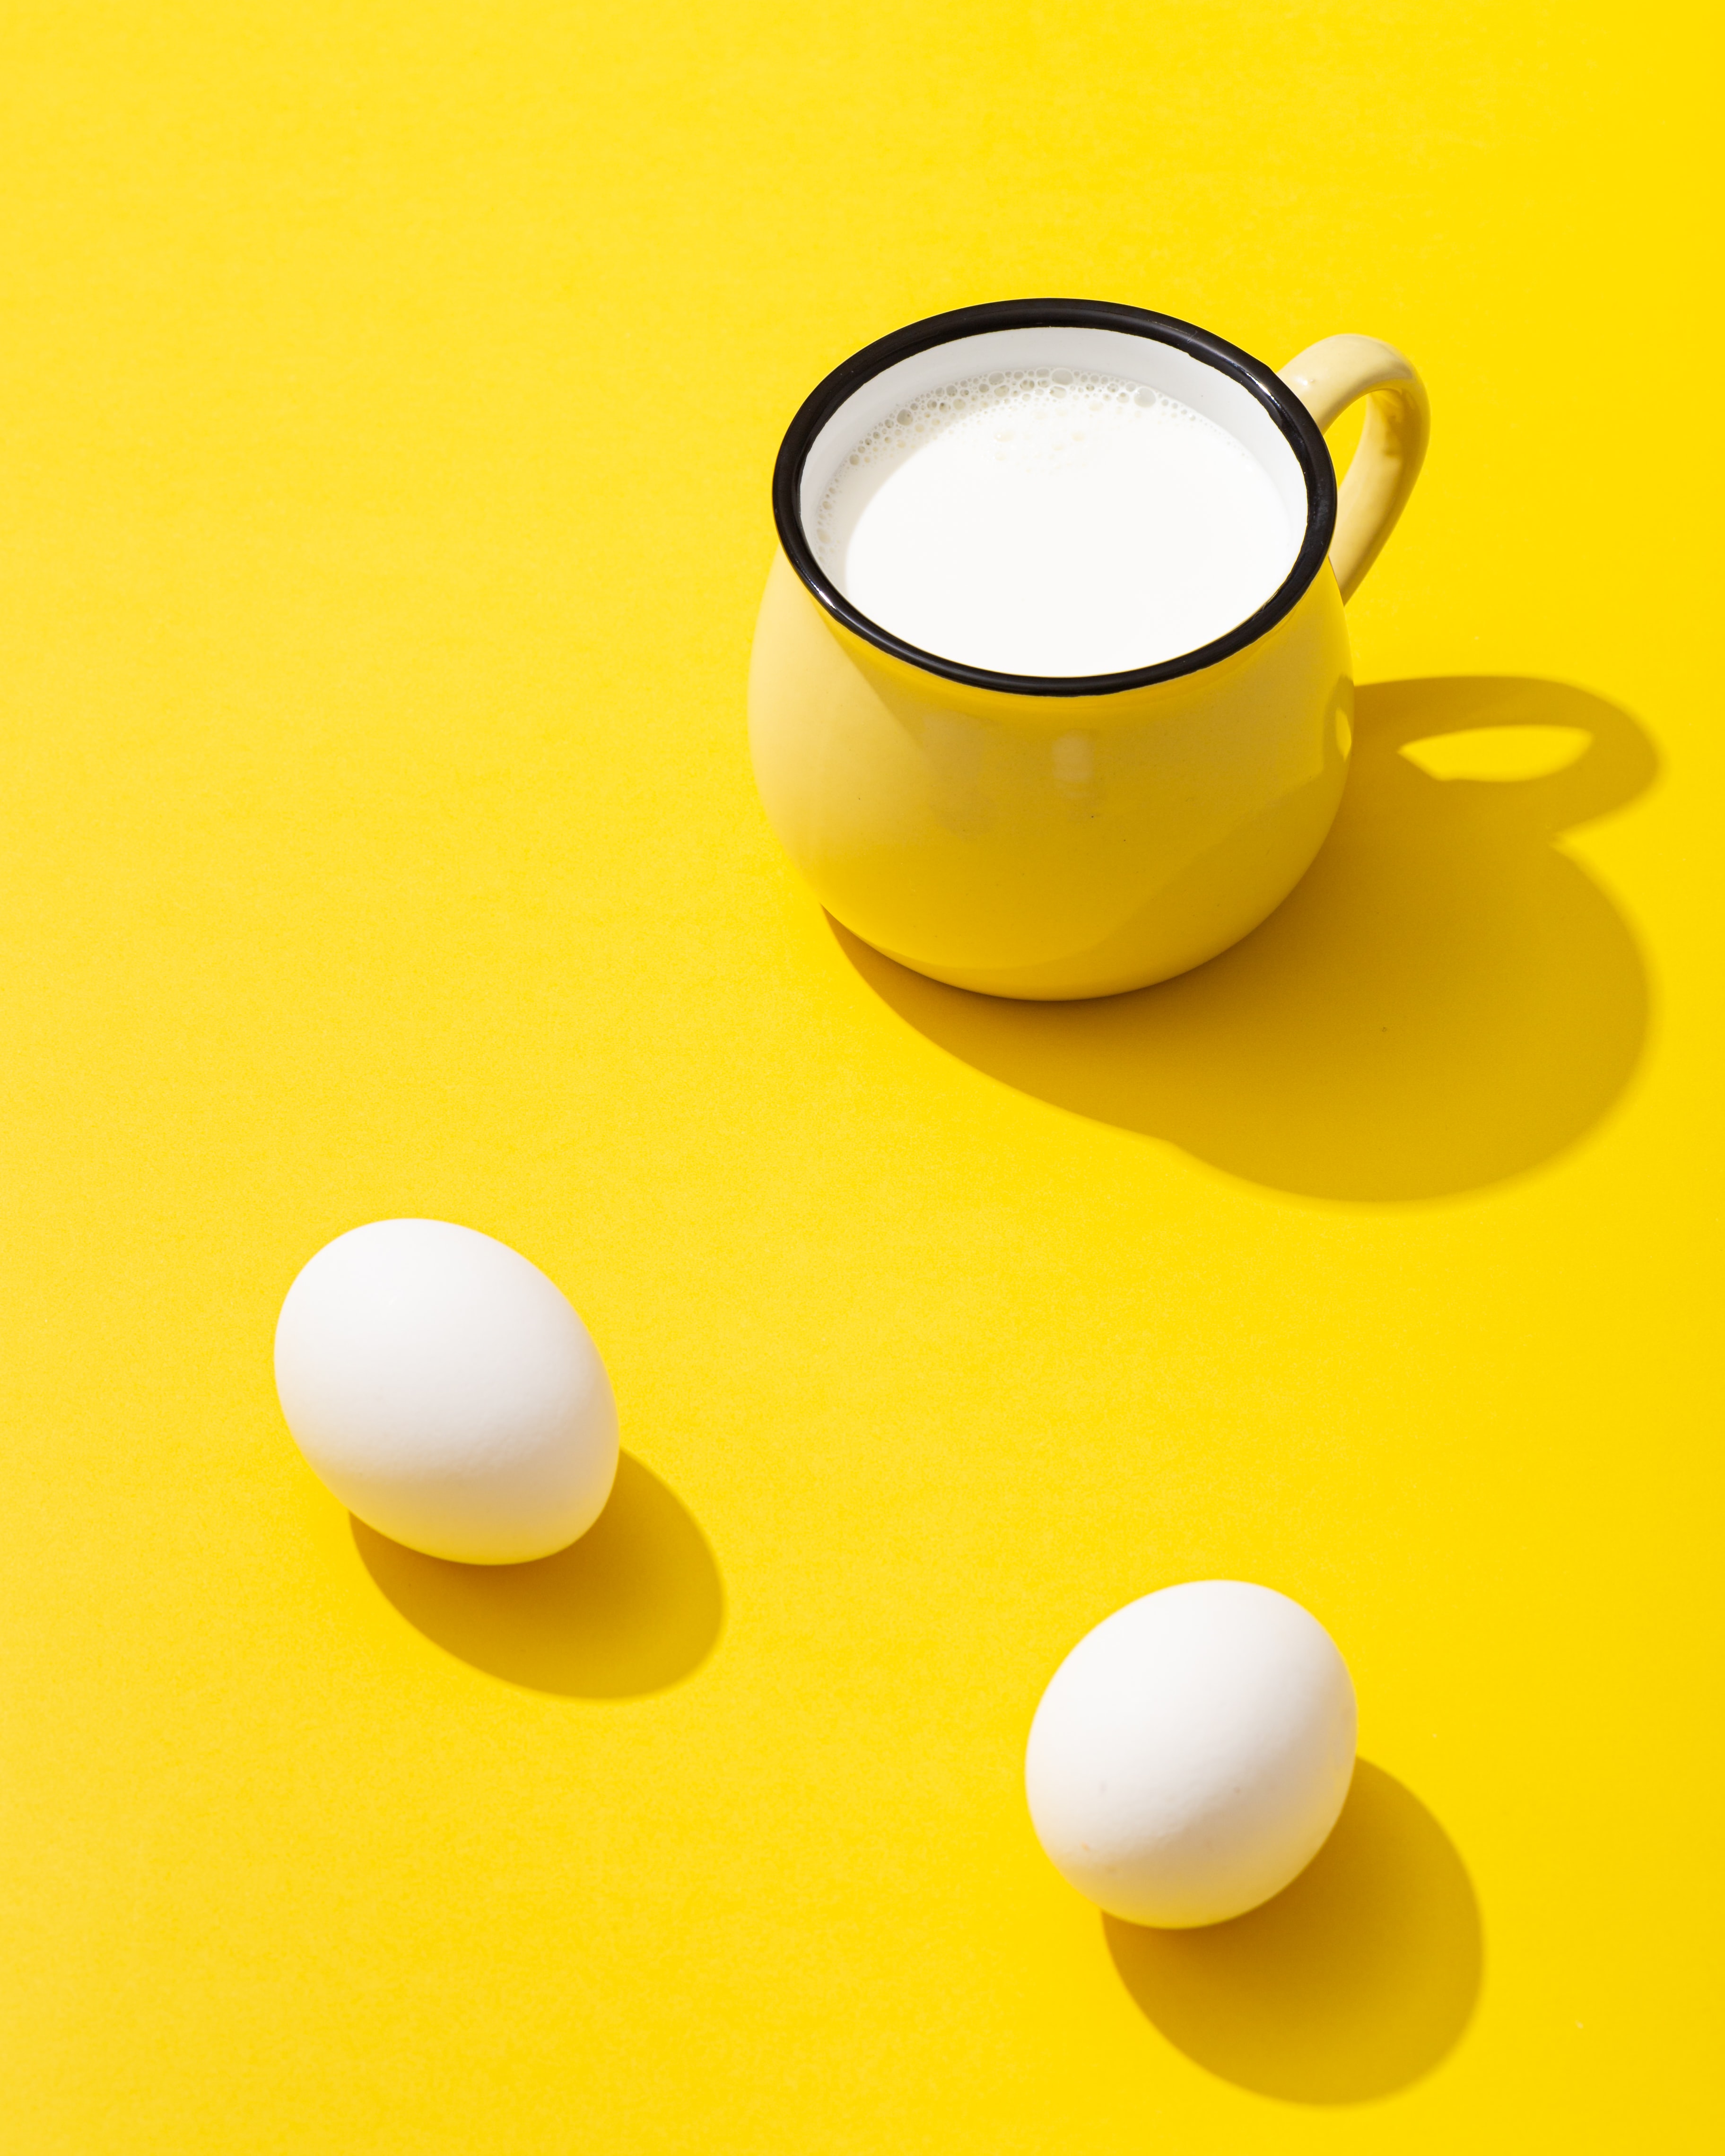 food, eggs, yellow, cup, milk images